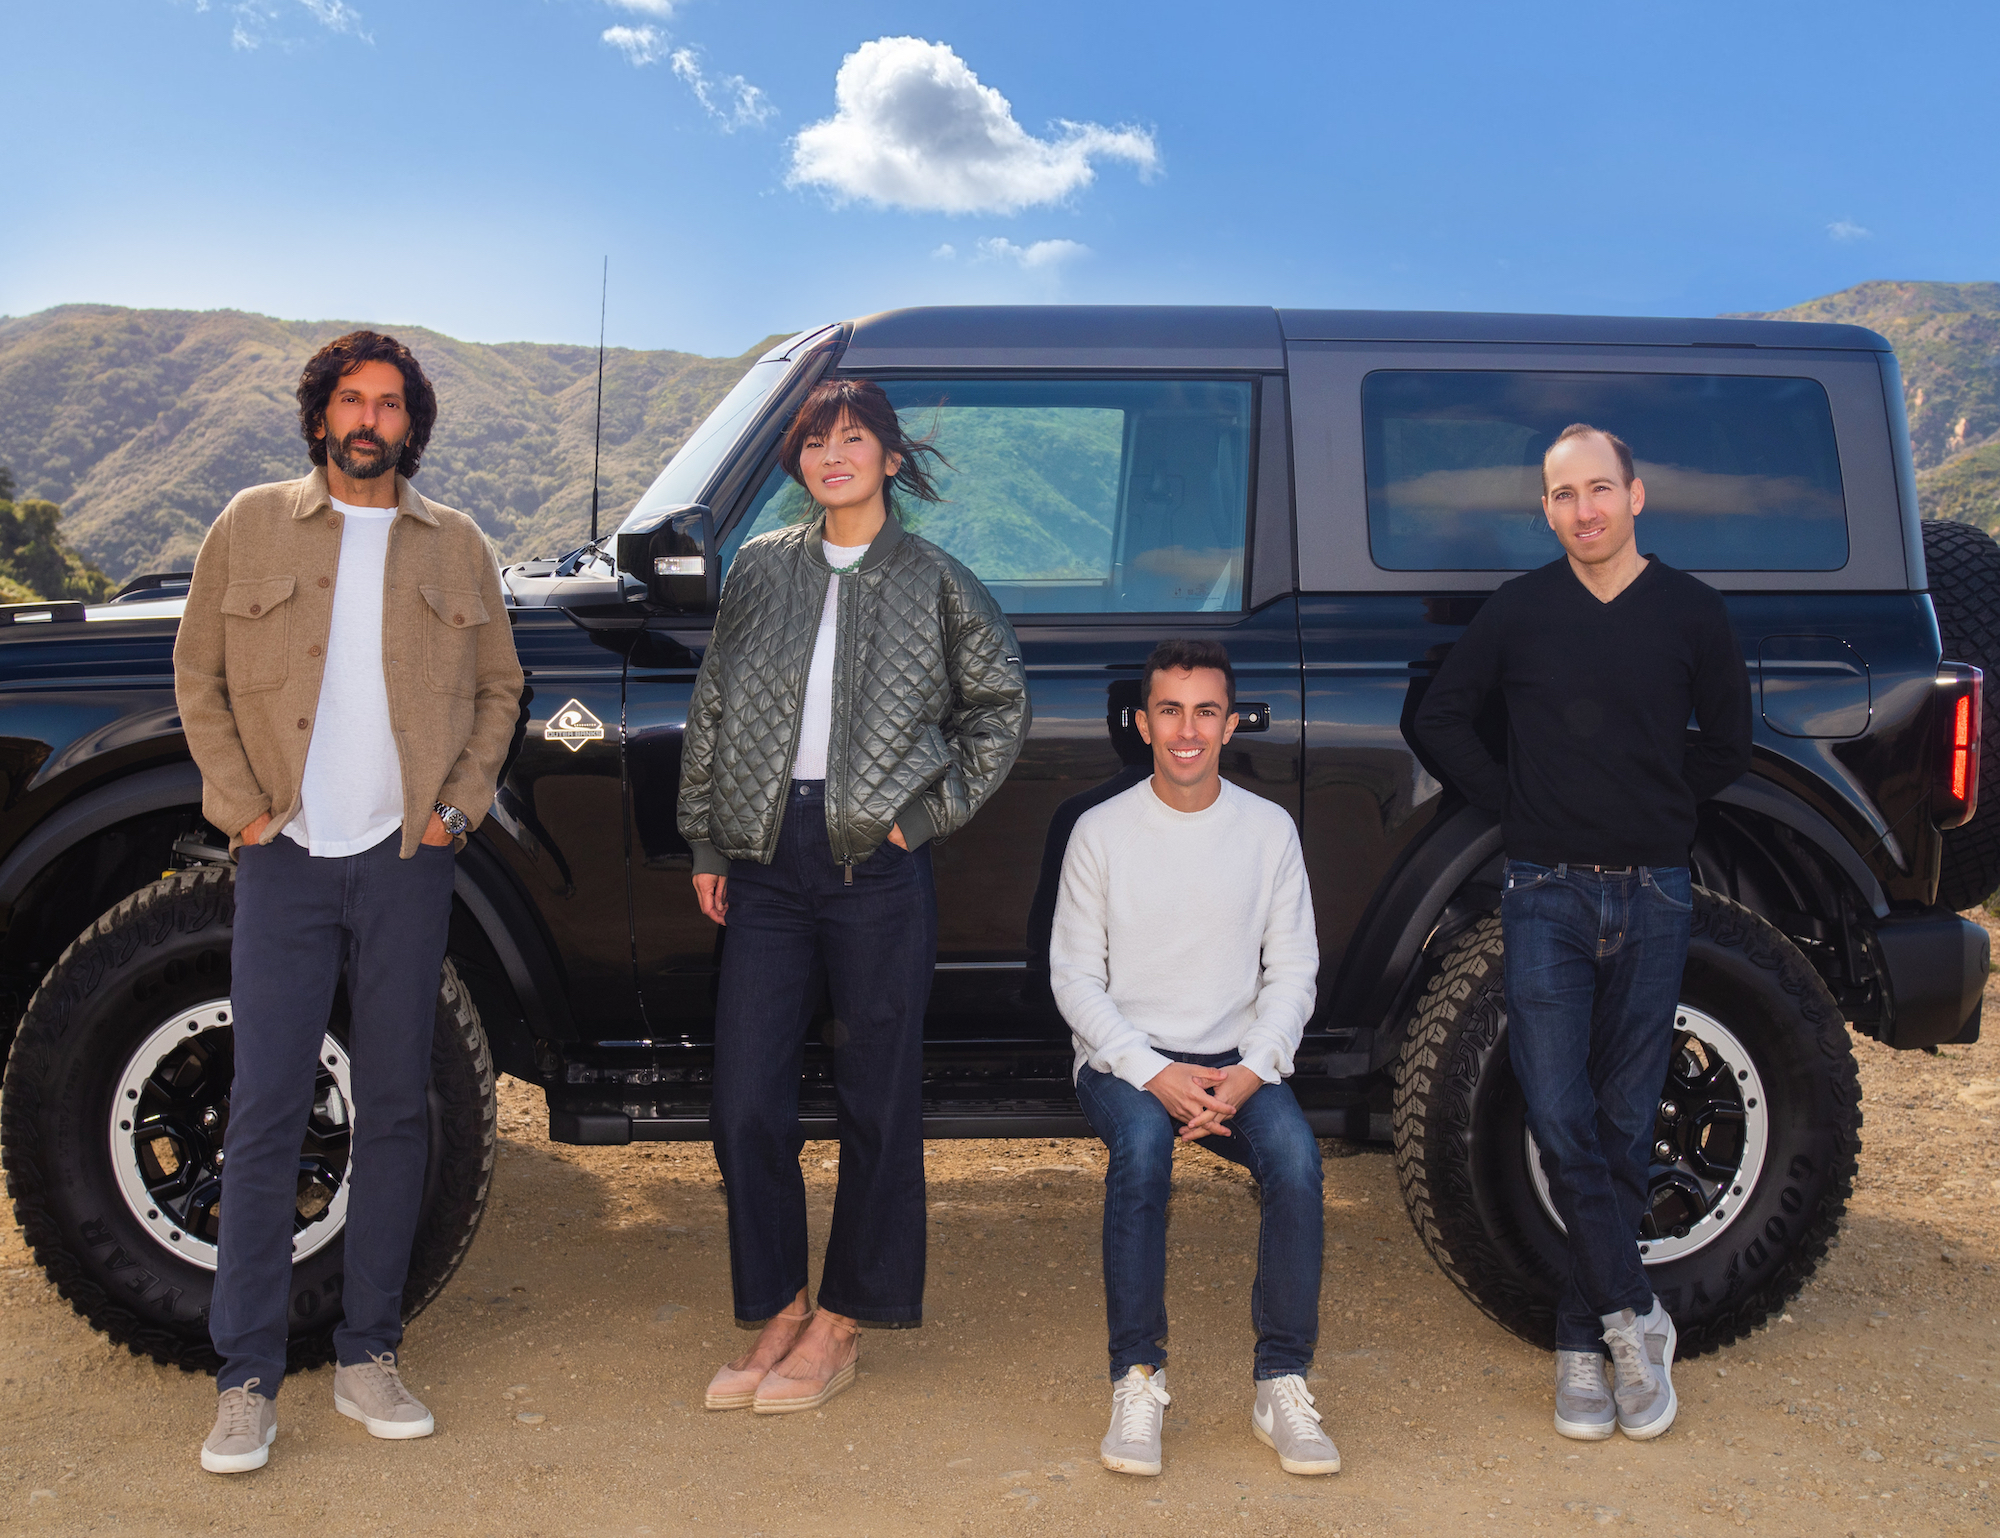 Caramel’s executive team pose together in front of an SUV.